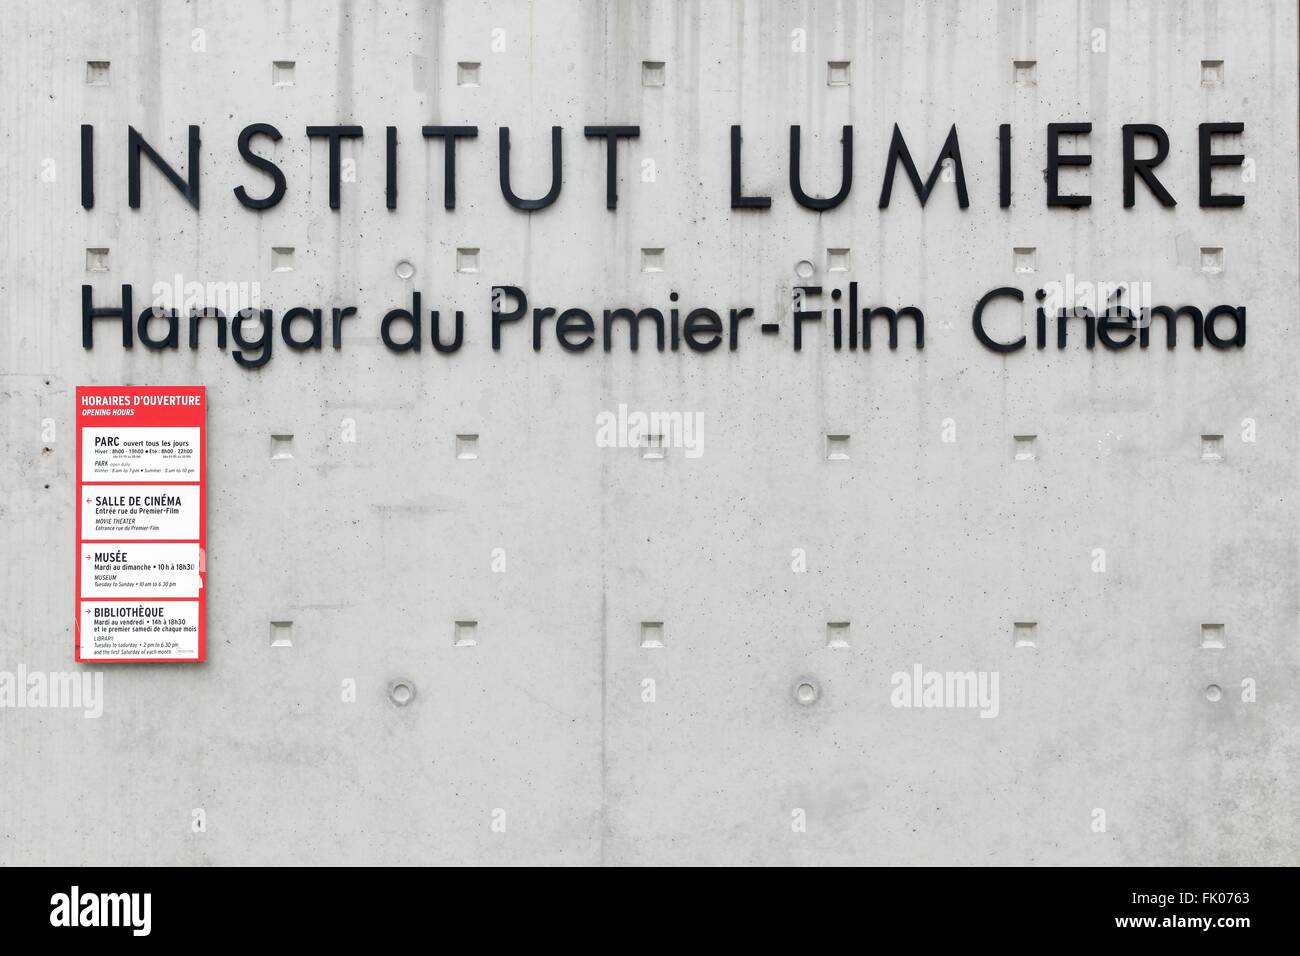 Institut Lumiere in Lyon, France Stock Photo